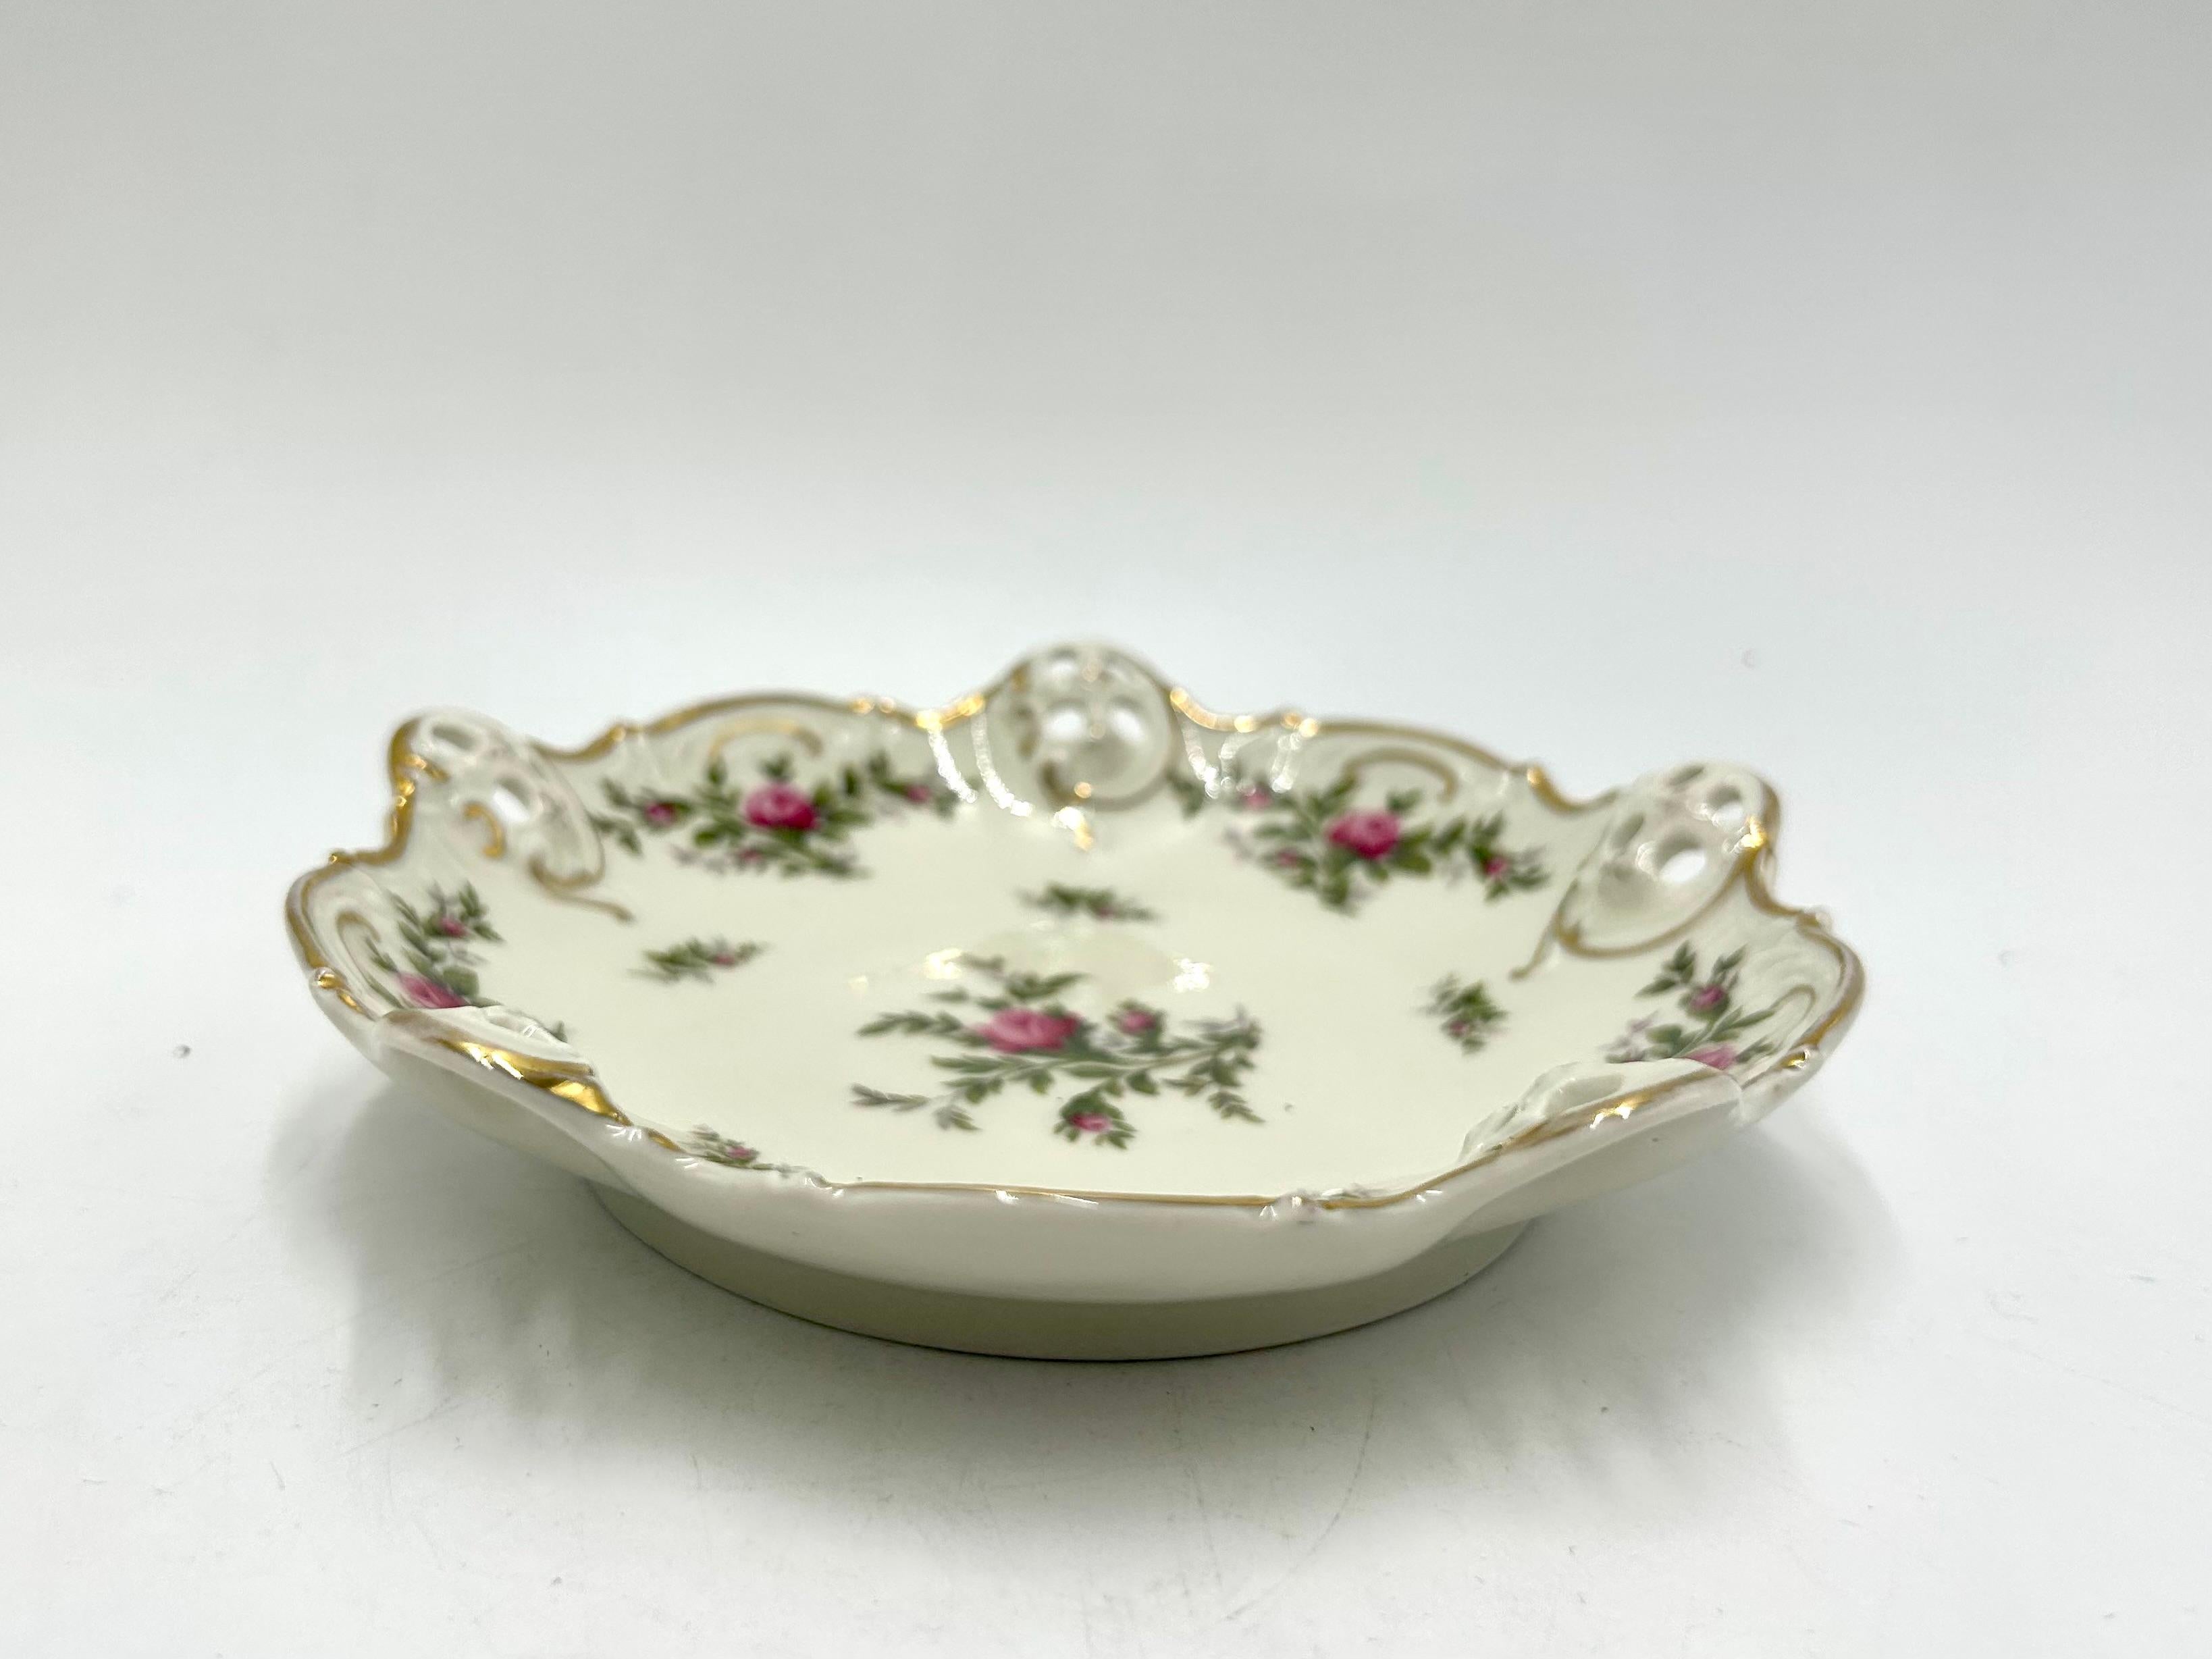 A plate with openwork sides from the Moliere series by the renowned German Rosenthal porcelain factory.
Ecru porcelain decorated with gilding on the edges and a rose motif.
Signed with the mark of the manufacturer from the years 1945-1946.
Very